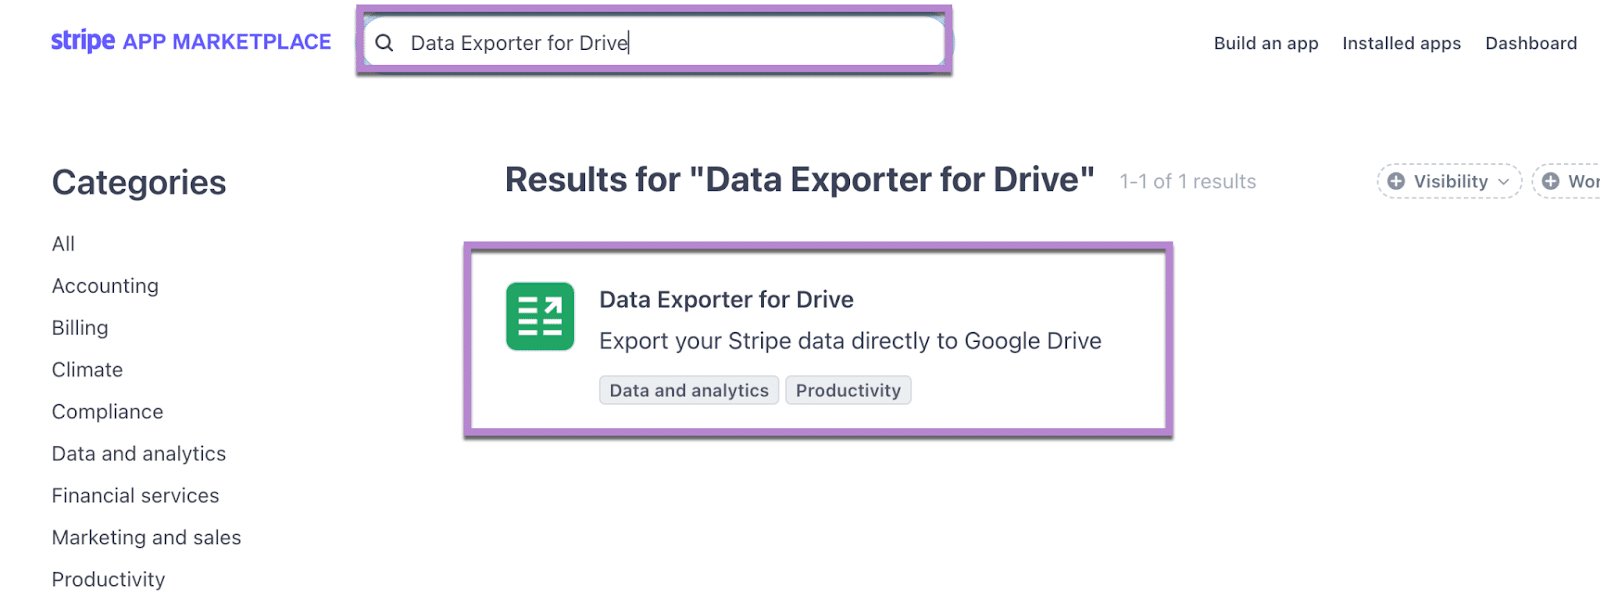 data exporter for drive 